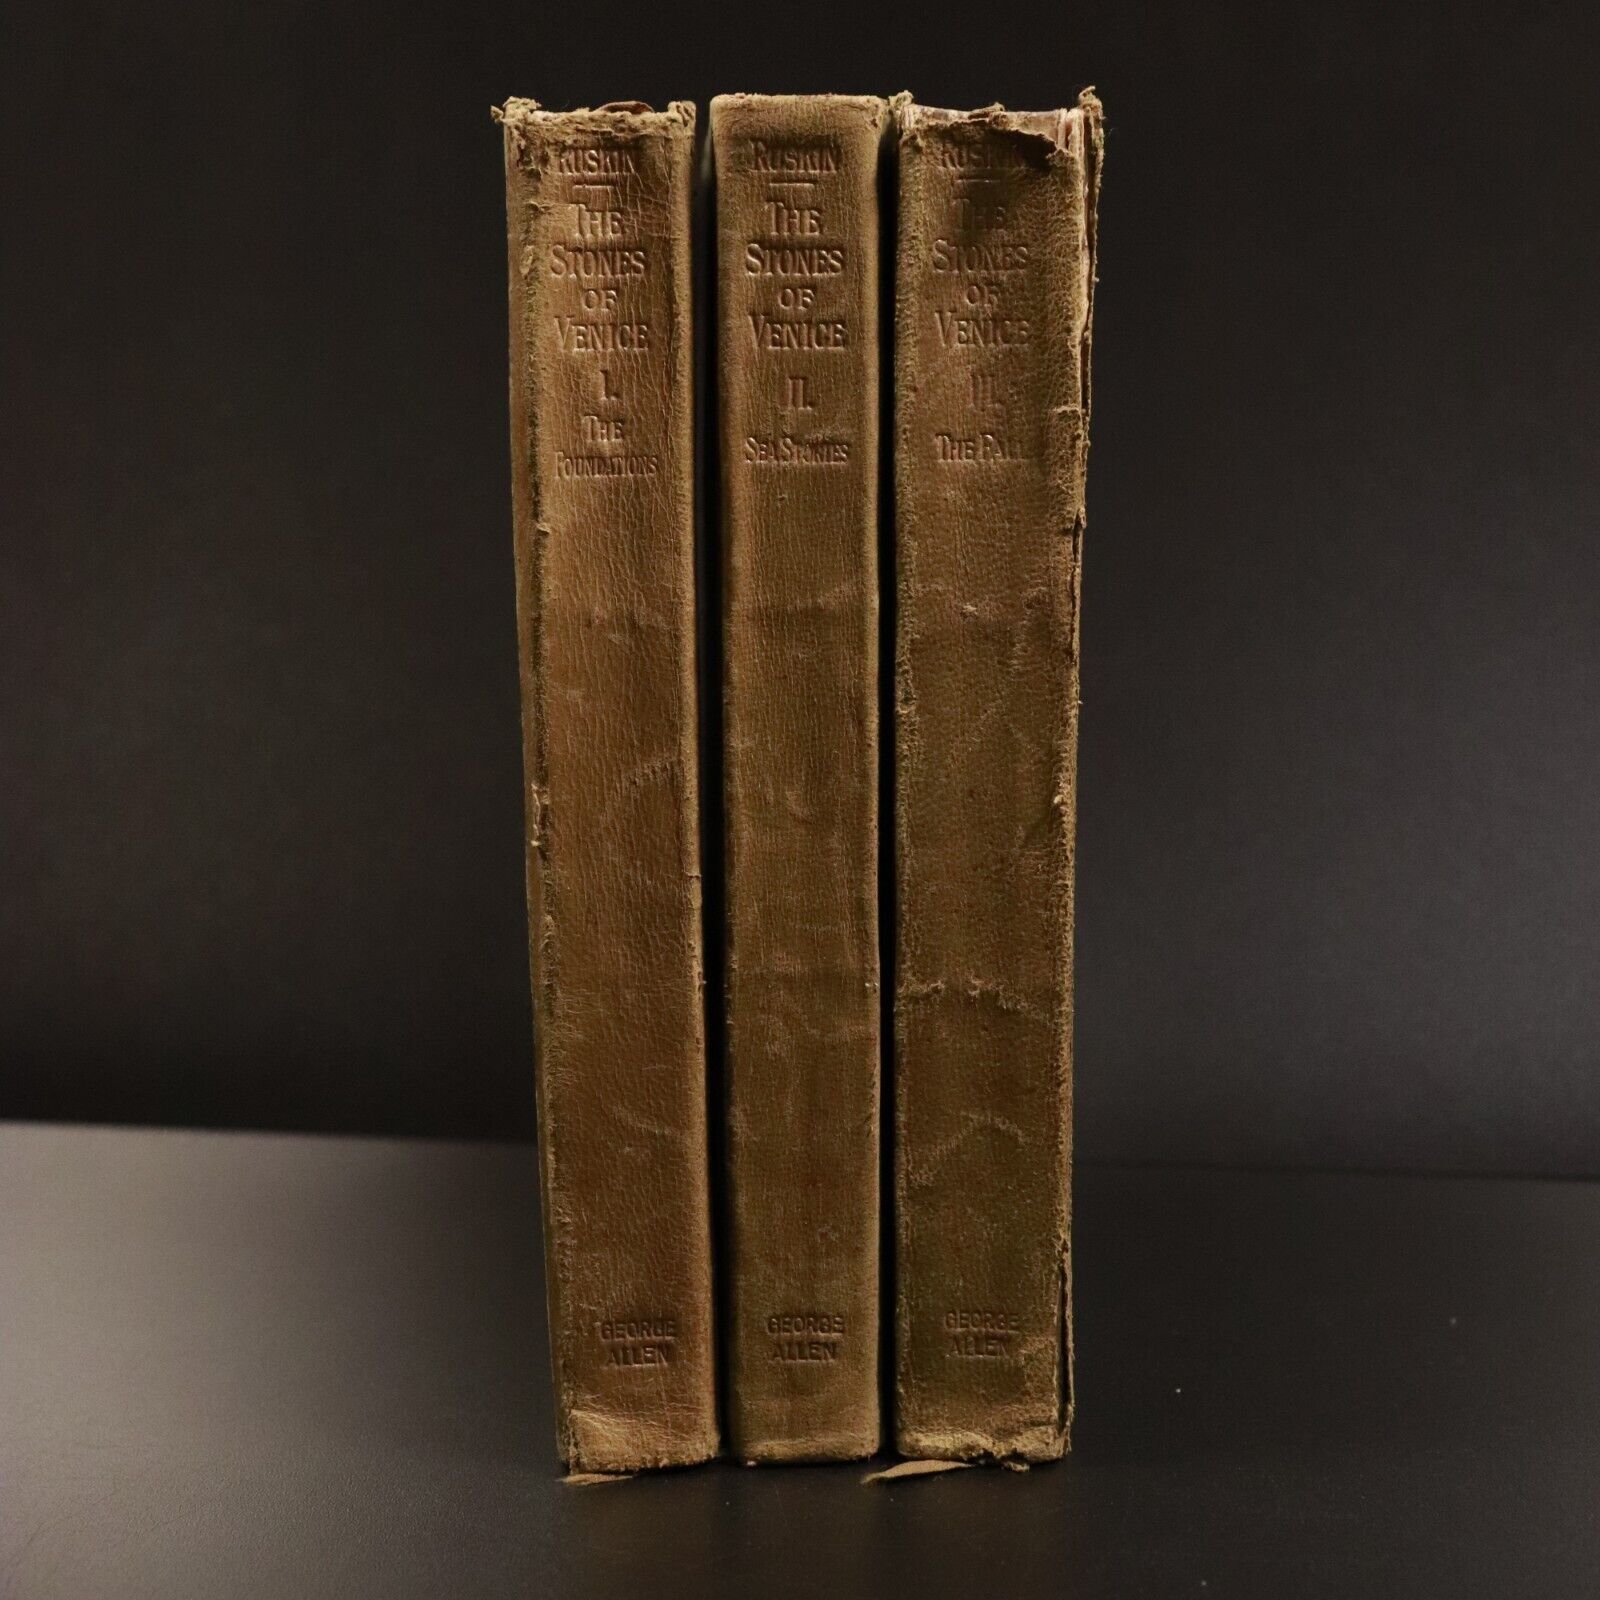 1906 3vol The Stones Of Venice by John Ruskin Antique Architecture Book Set